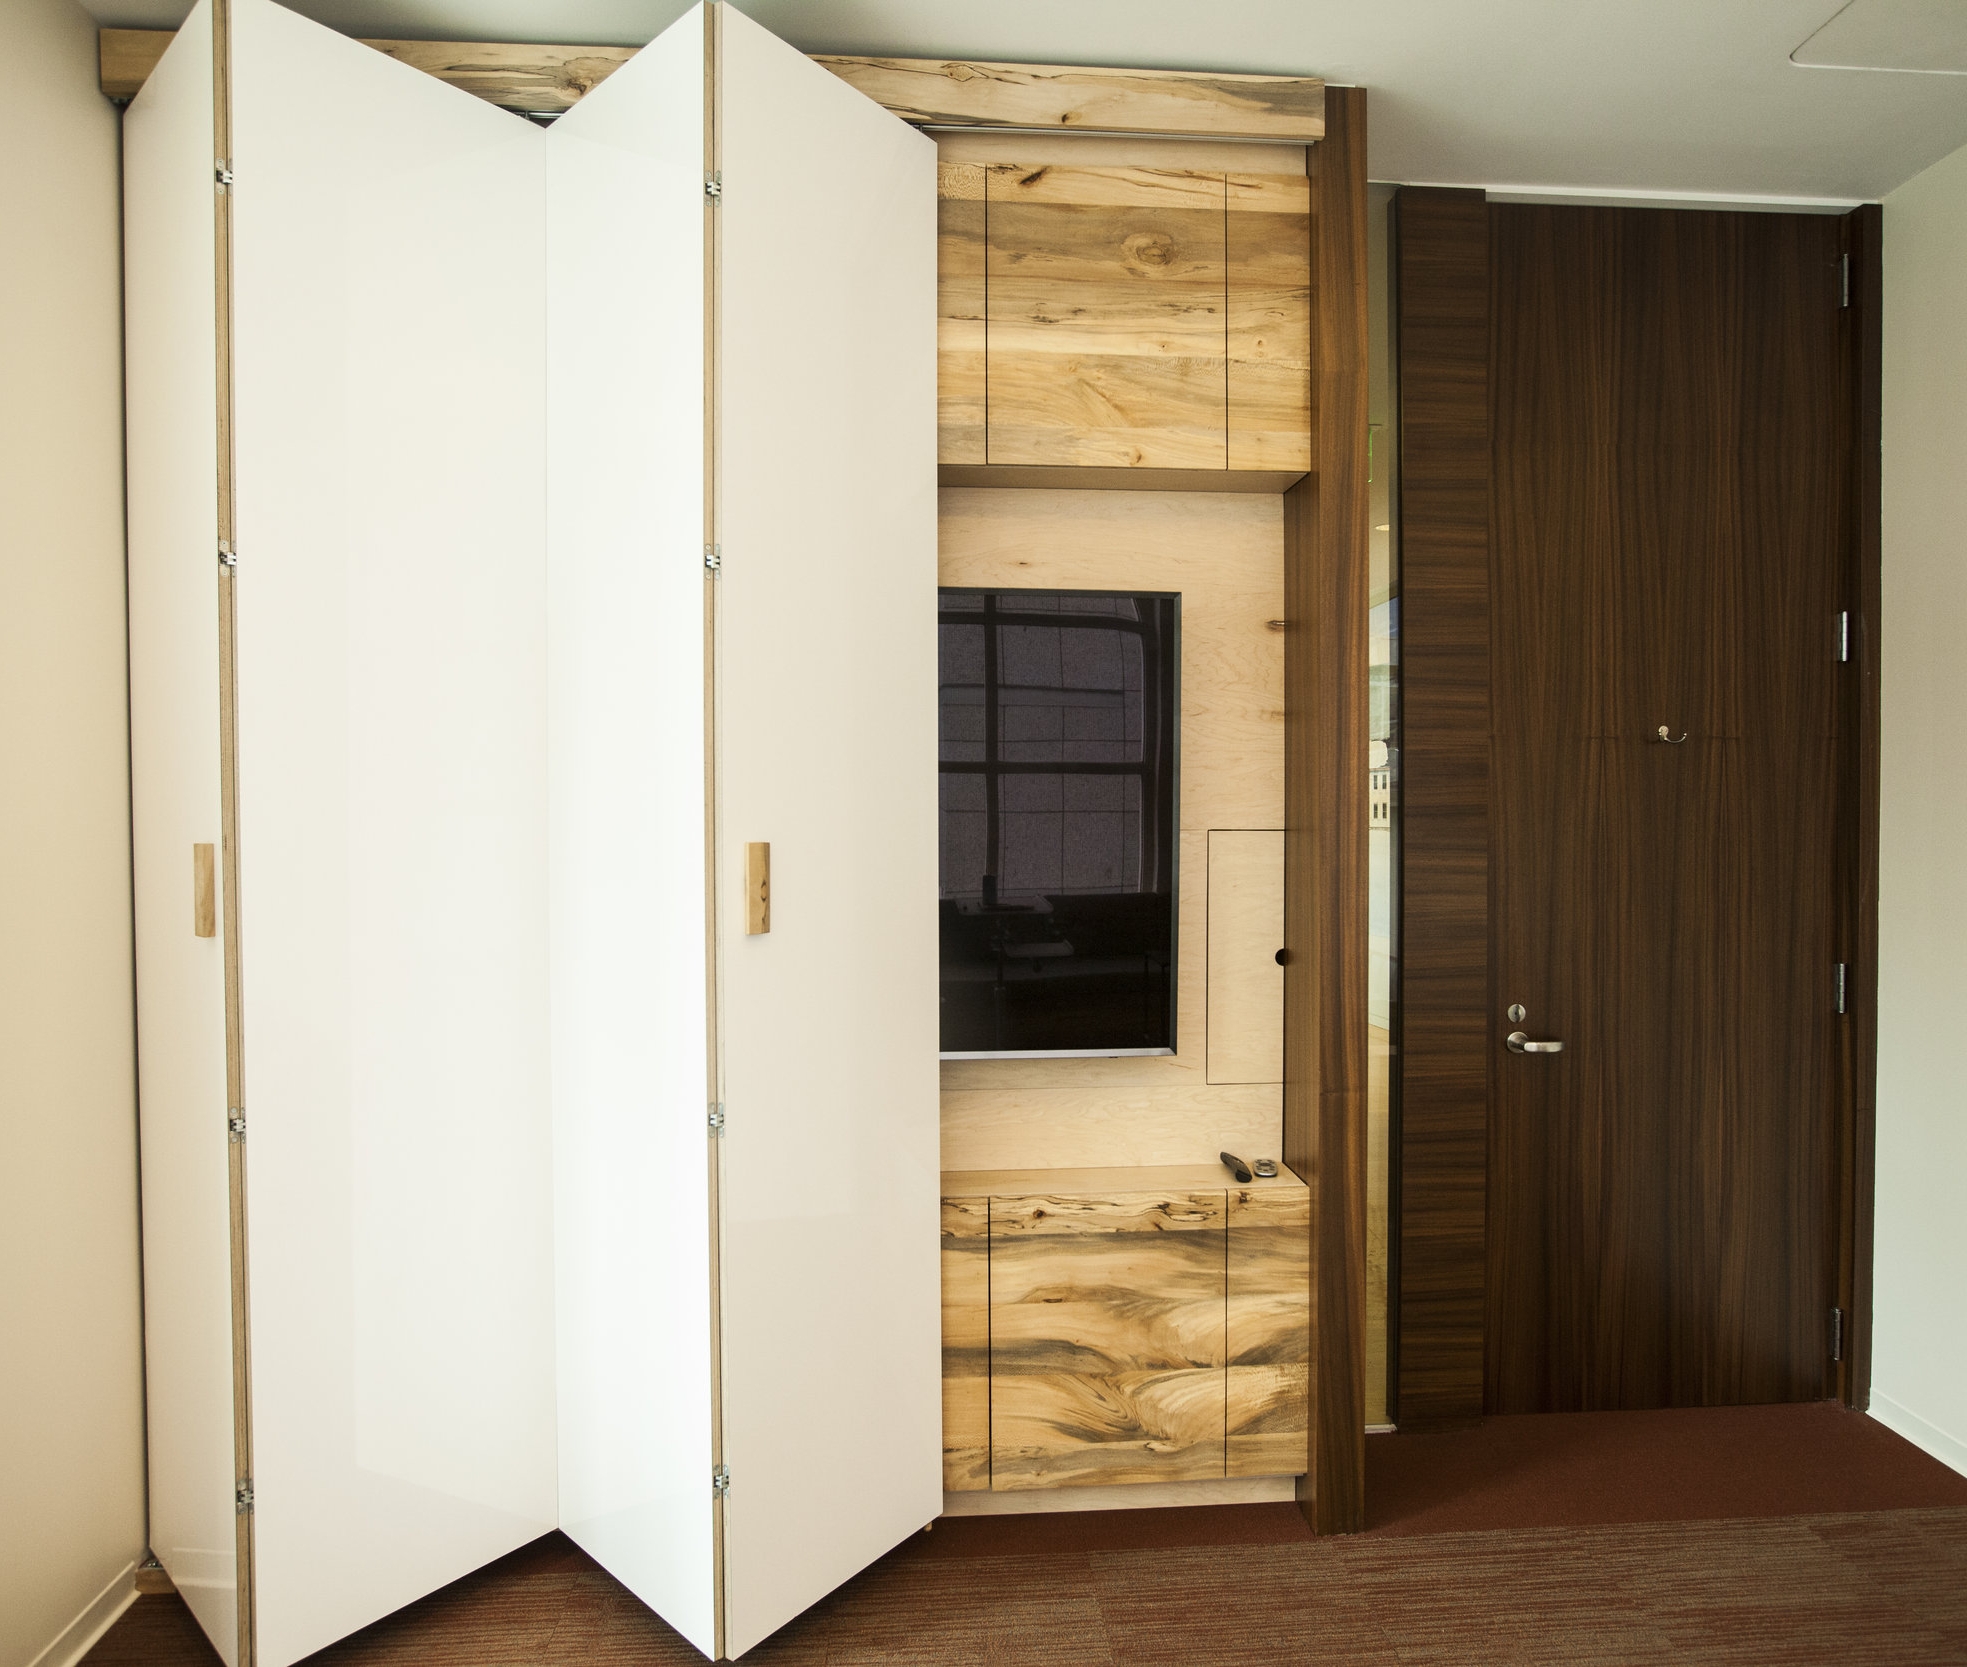  Accordion opening door reveals a beautiful sycamore paneled cabinet behind with storage and a large flat screen. 